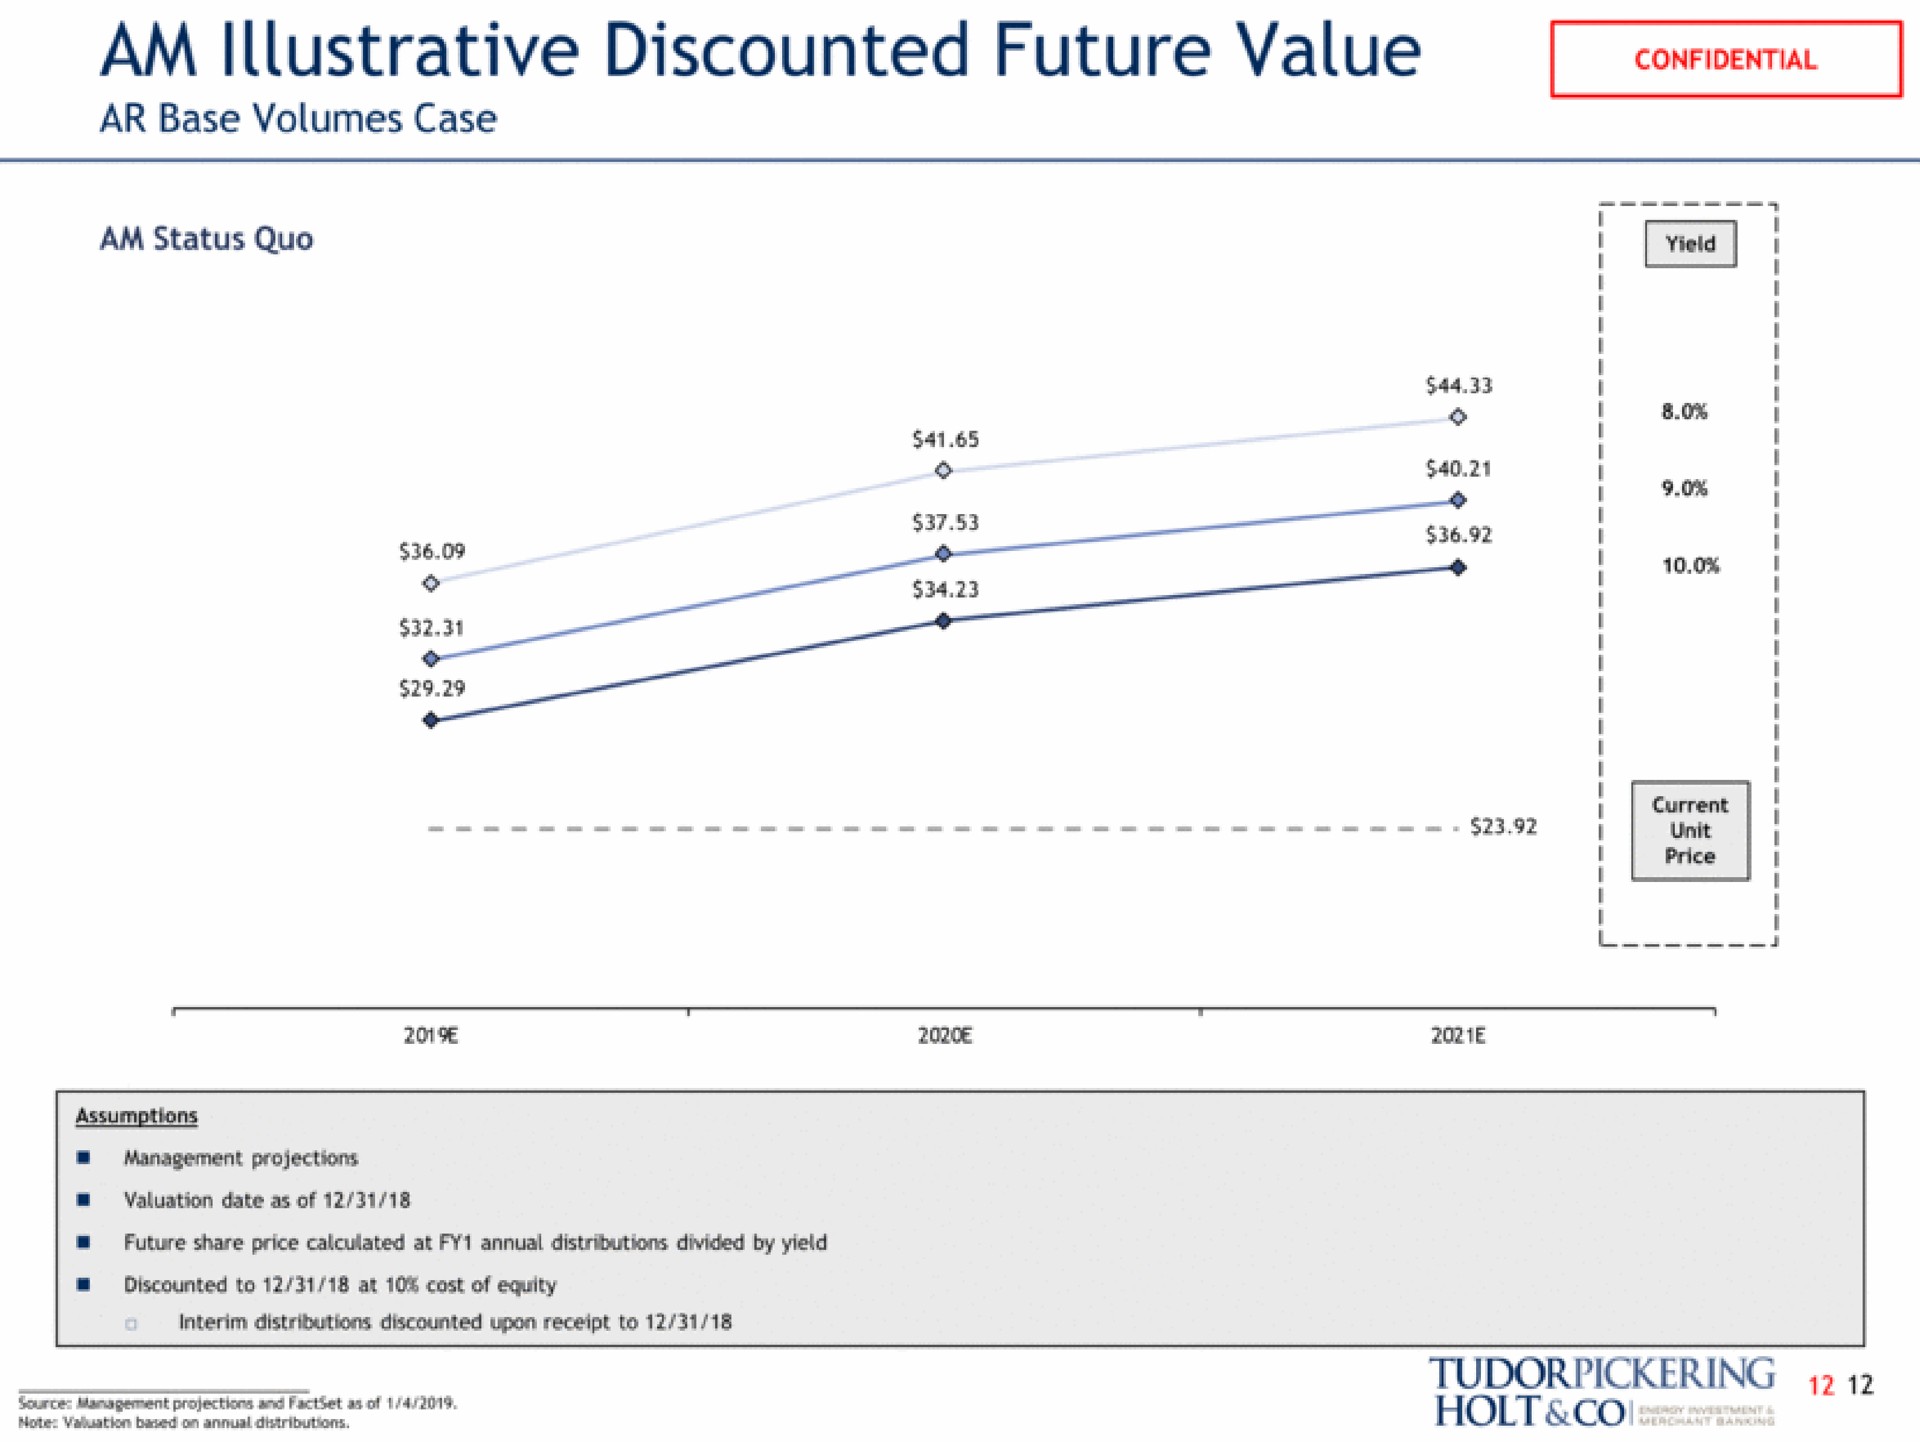 am illustrative discounted future value do poy a note based on holt | Tudor, Pickering, Holt & Co